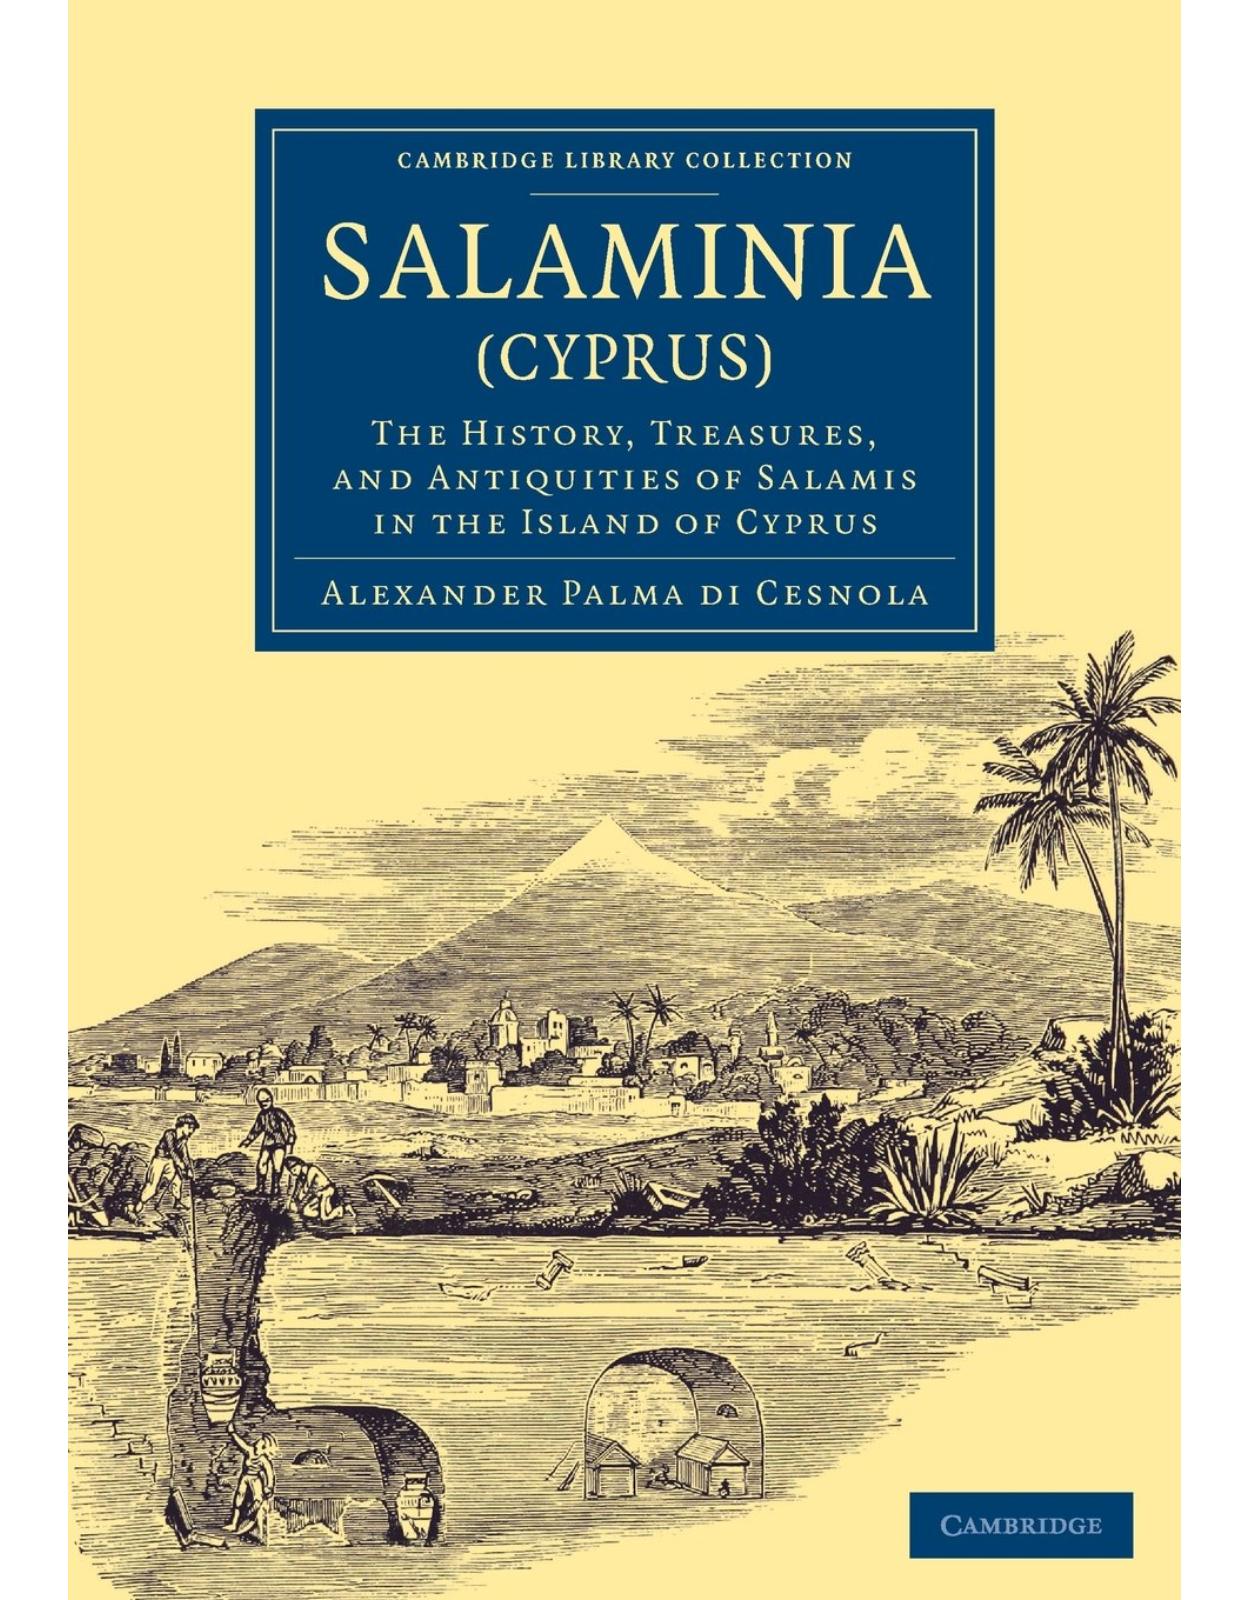 Salaminia (Cyprus): The History, Treasures, and Antiquities of Salamis in the Island of Cyprus (Cambridge Library Collection - Archaeology)